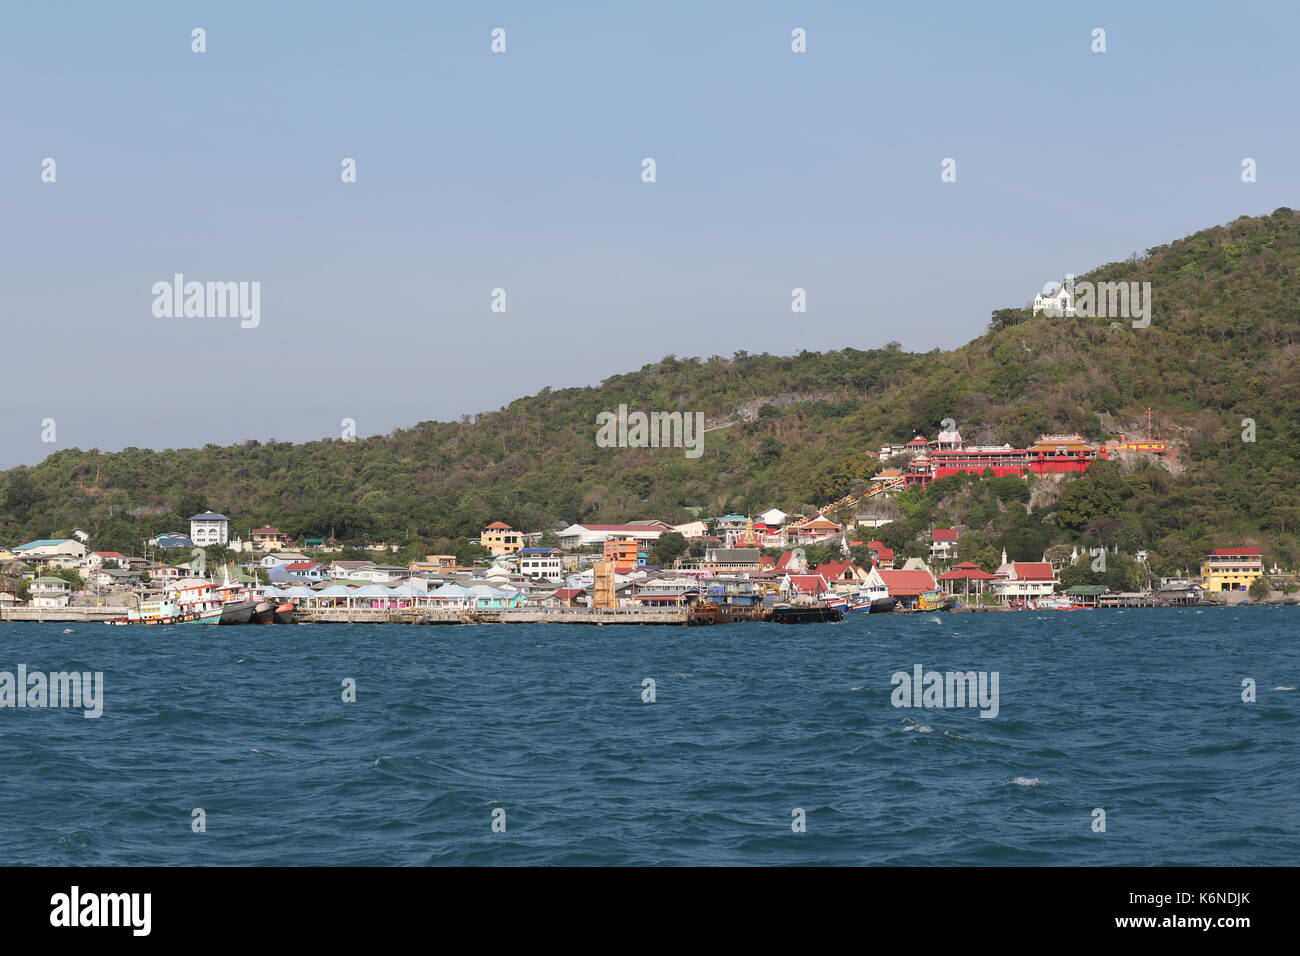 Deserted island in the sea of Tropical Area chonburi province in thailand. Stock Photo